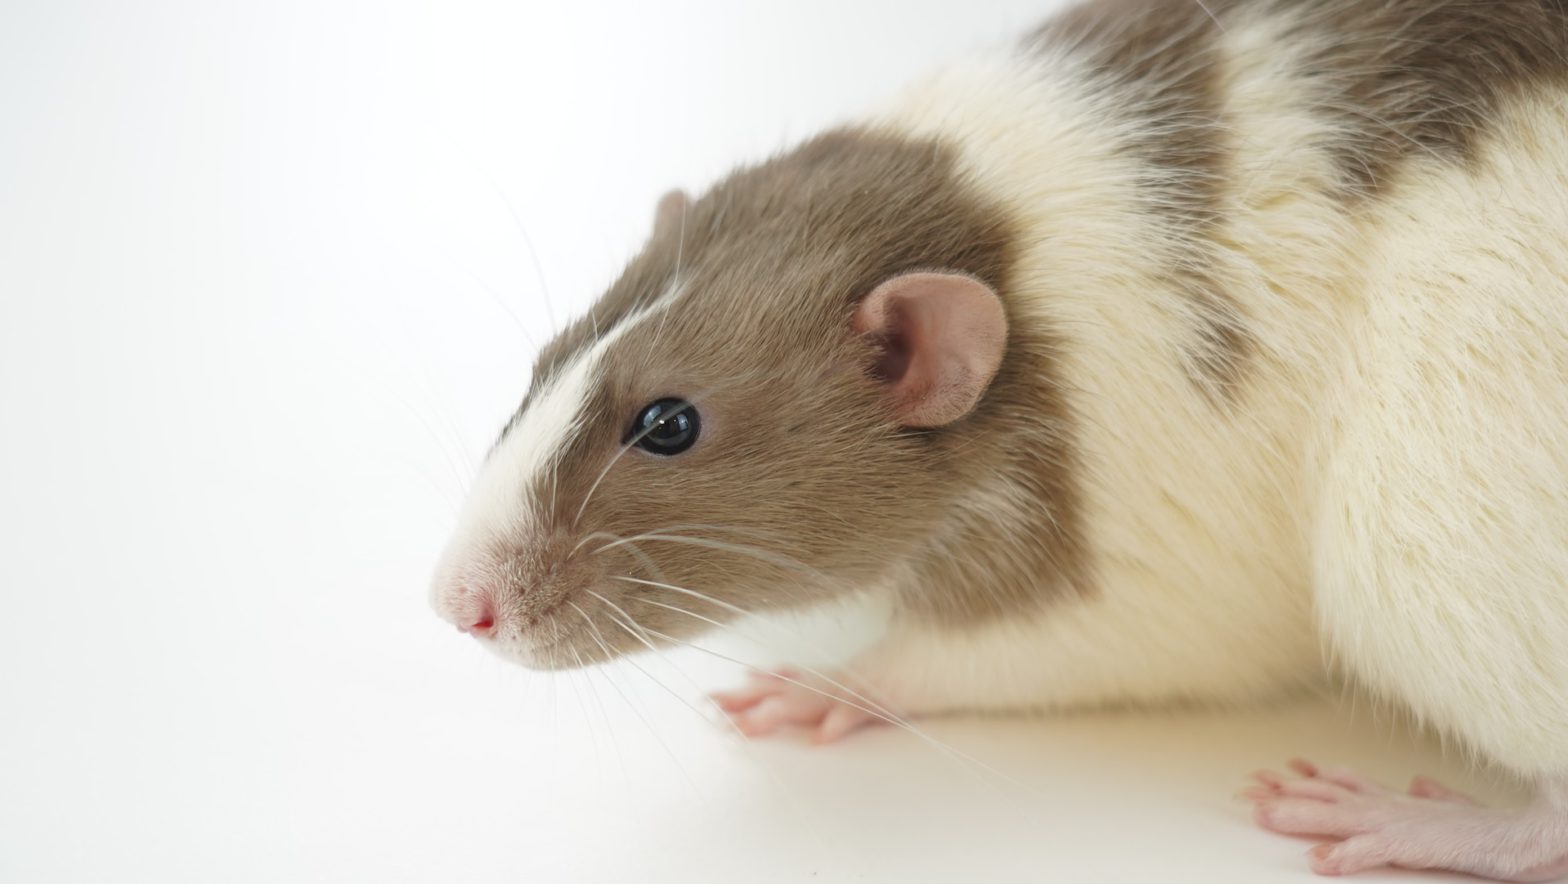 Rodent Control for Homes: Identifying, Handling, and Preventing Infestations